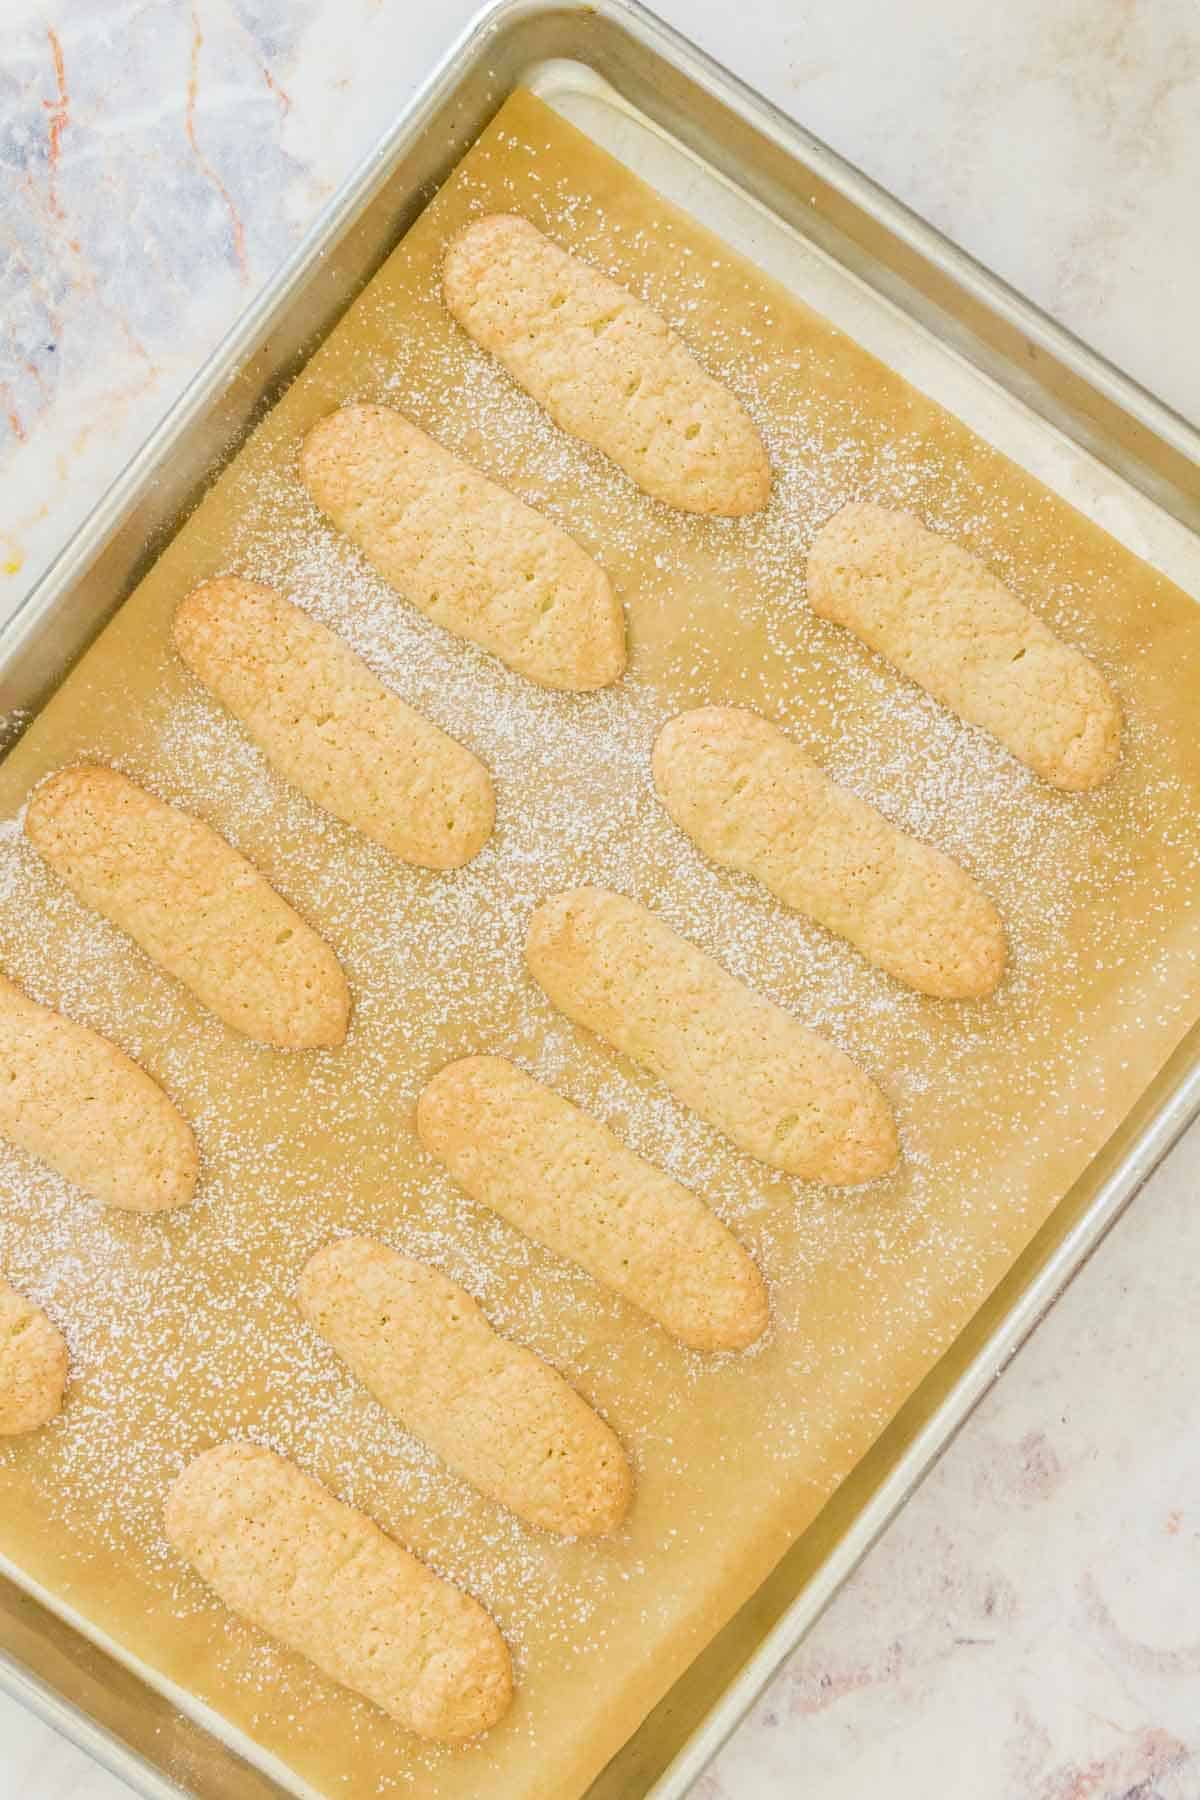 Baked gluten free ladyfingers on a baking sheet lined with parchment paper.